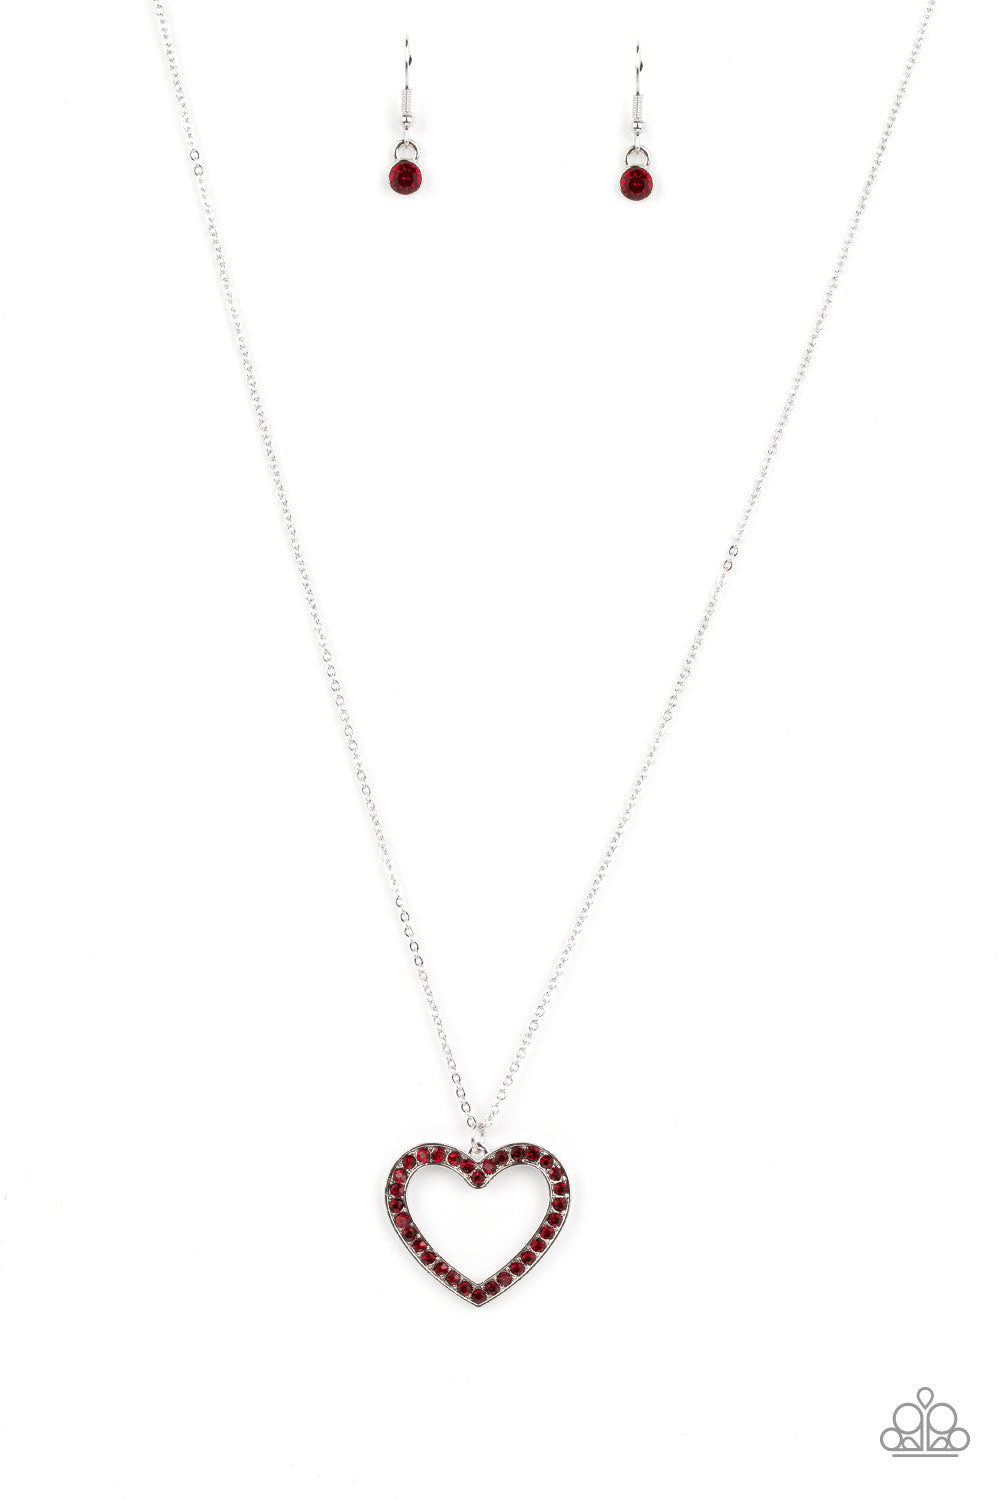 Dainty Darling Necklace (Red, Pink, White)